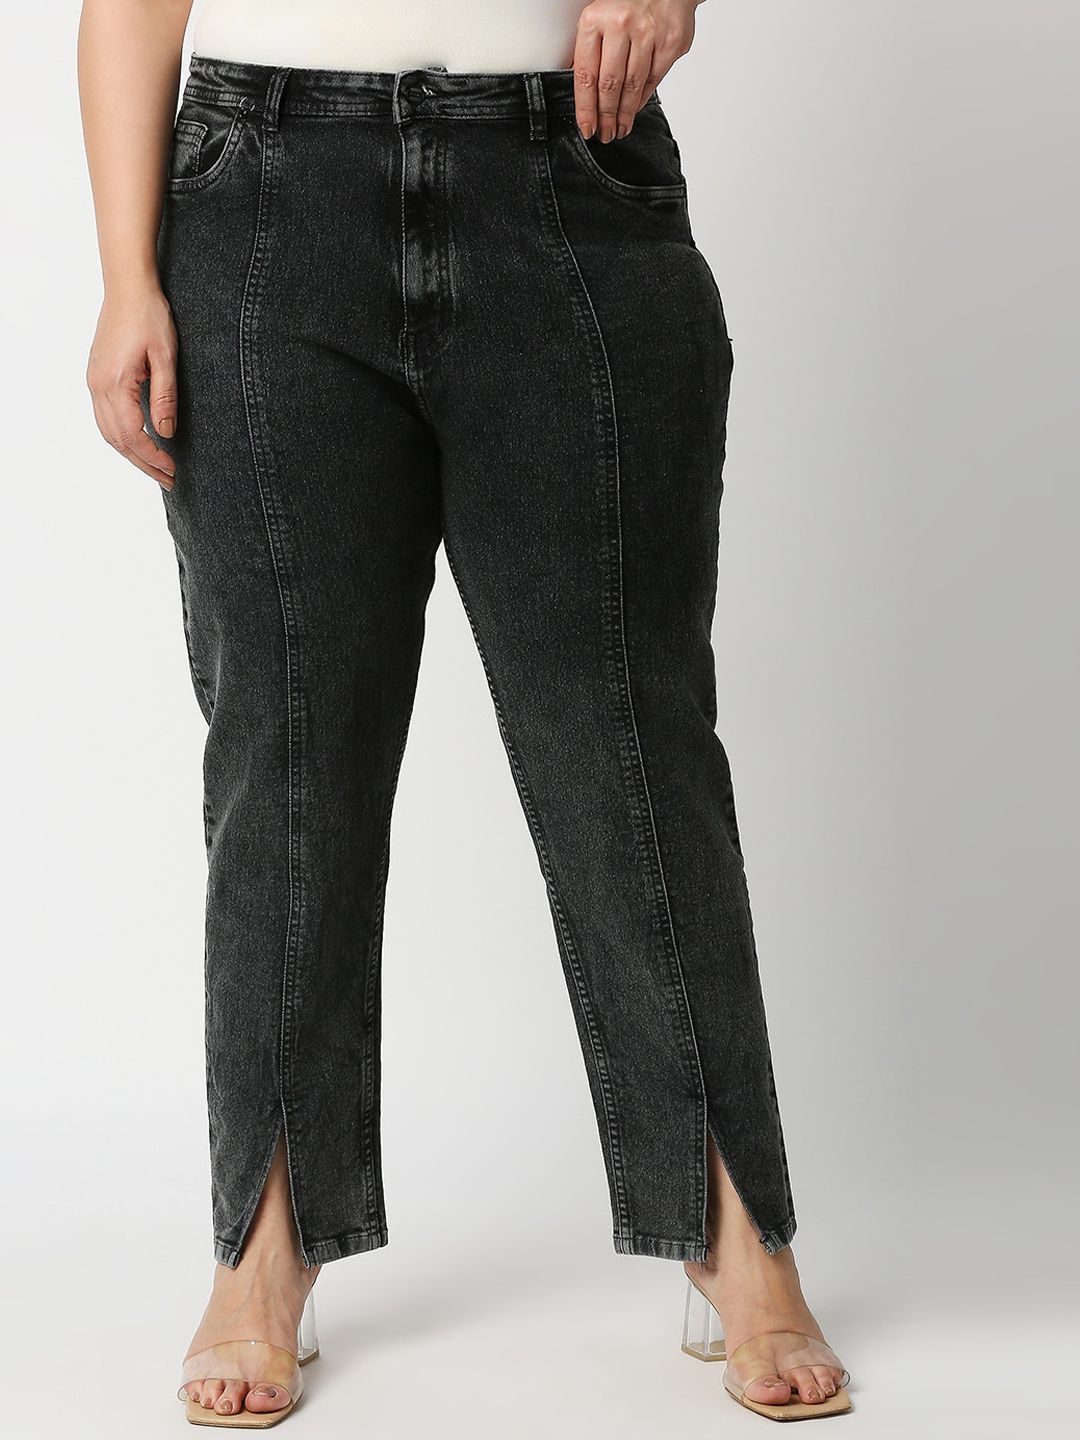 High Star Women Plus Size Black High-Rise Stretchable Jeans Price in India